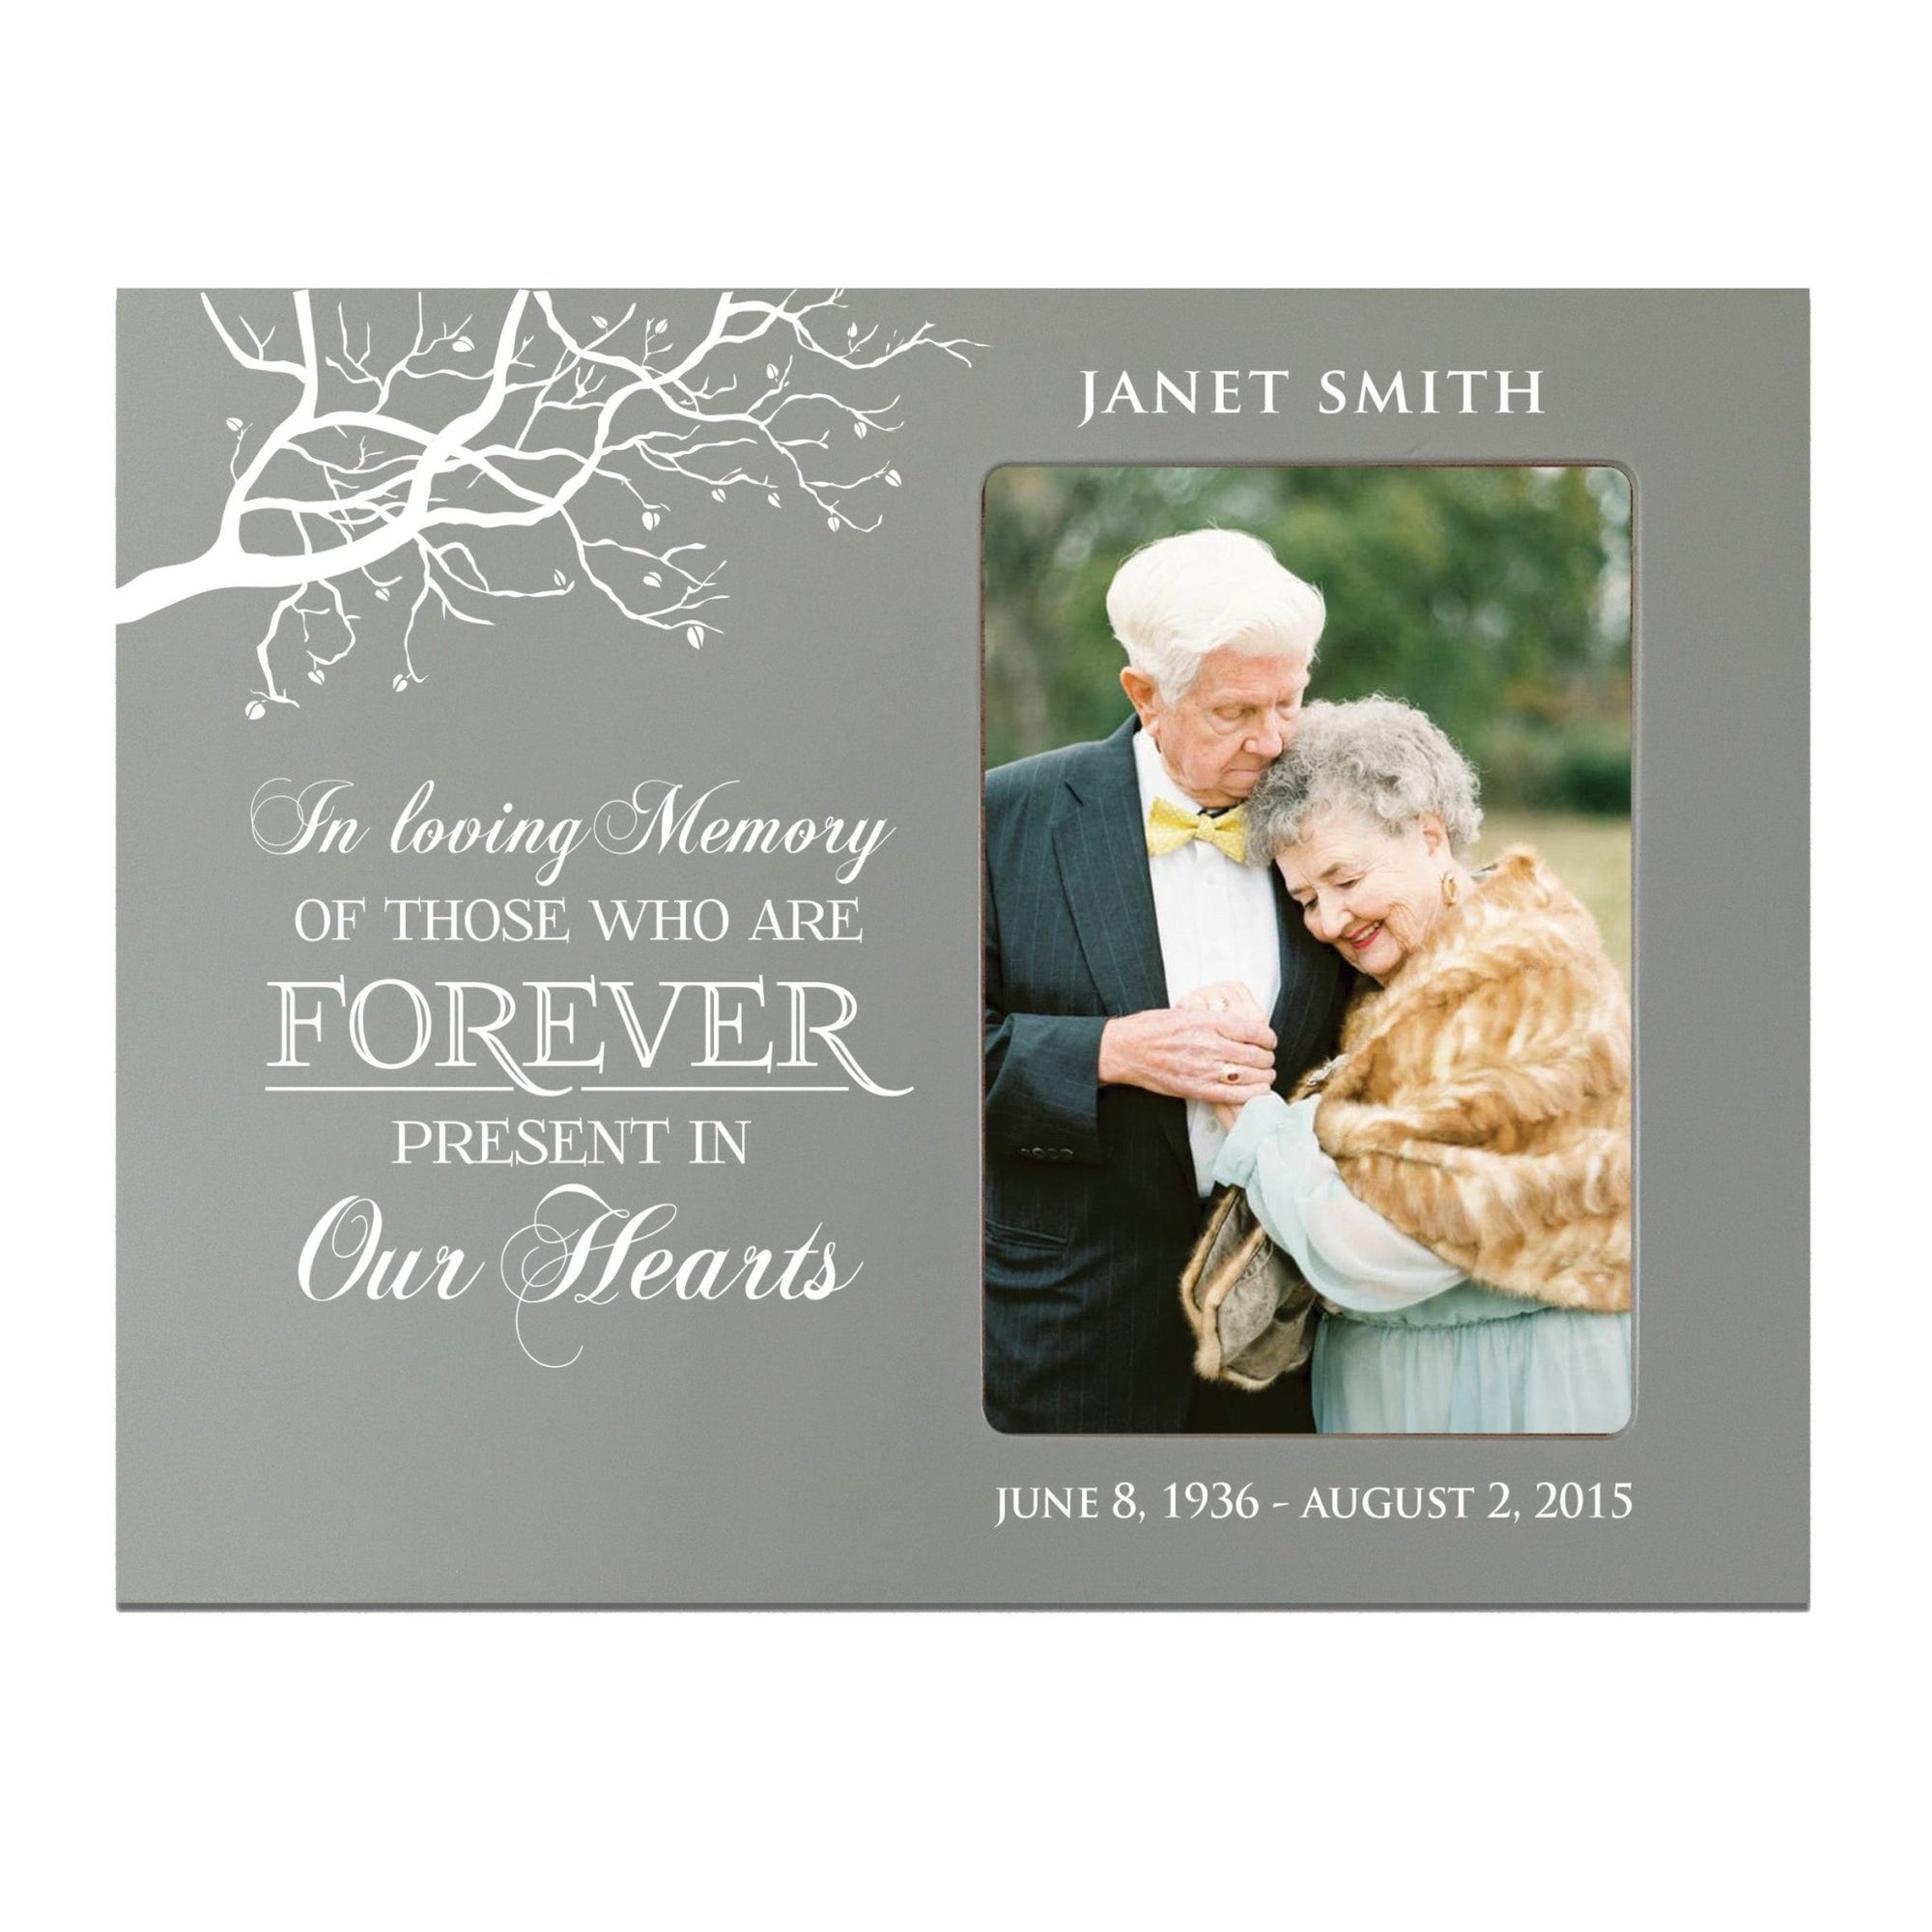 Personalized Wooden Memorial 8x10 Picture Frame holds 4x6 photo In Loving Memory - LifeSong Milestones